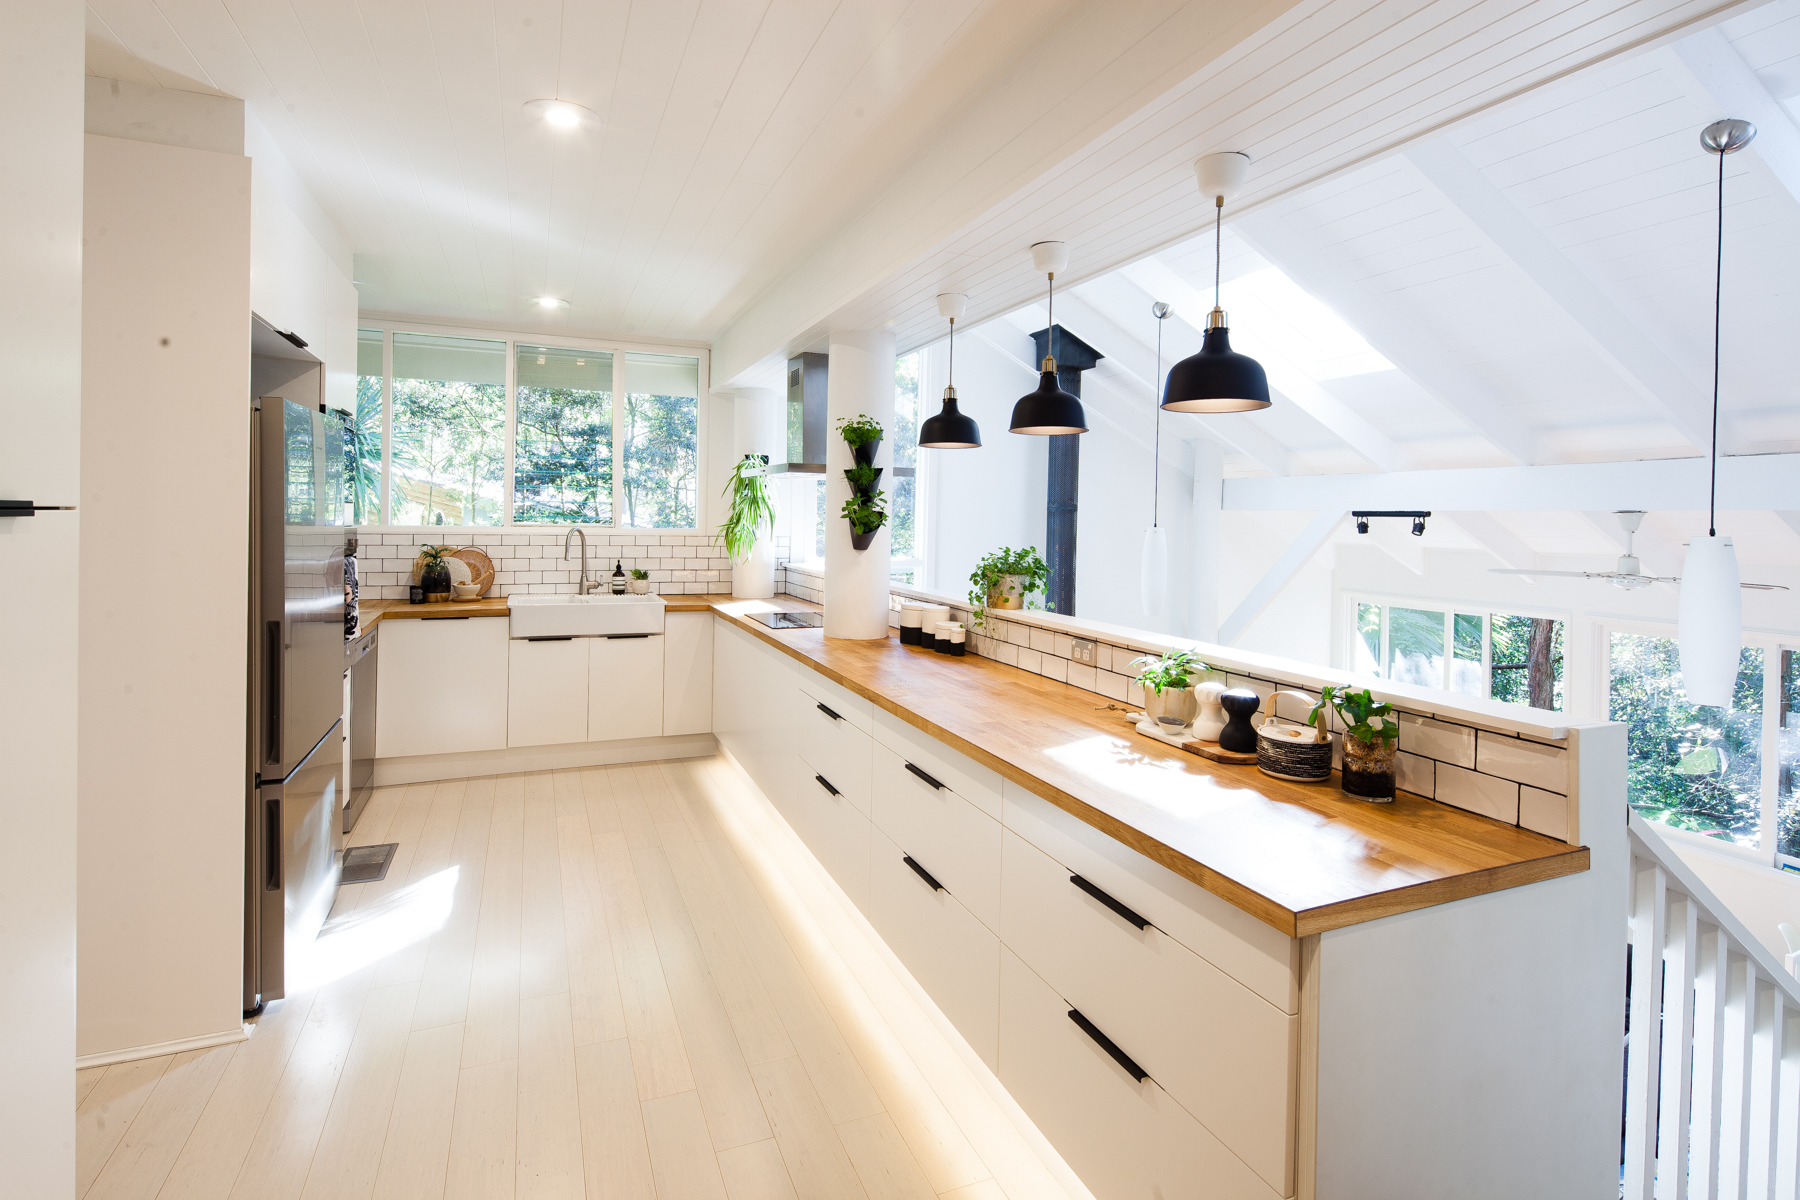 A Sydney blogger's light-filled and lovely IKEA kitchen - The Interiors Addict